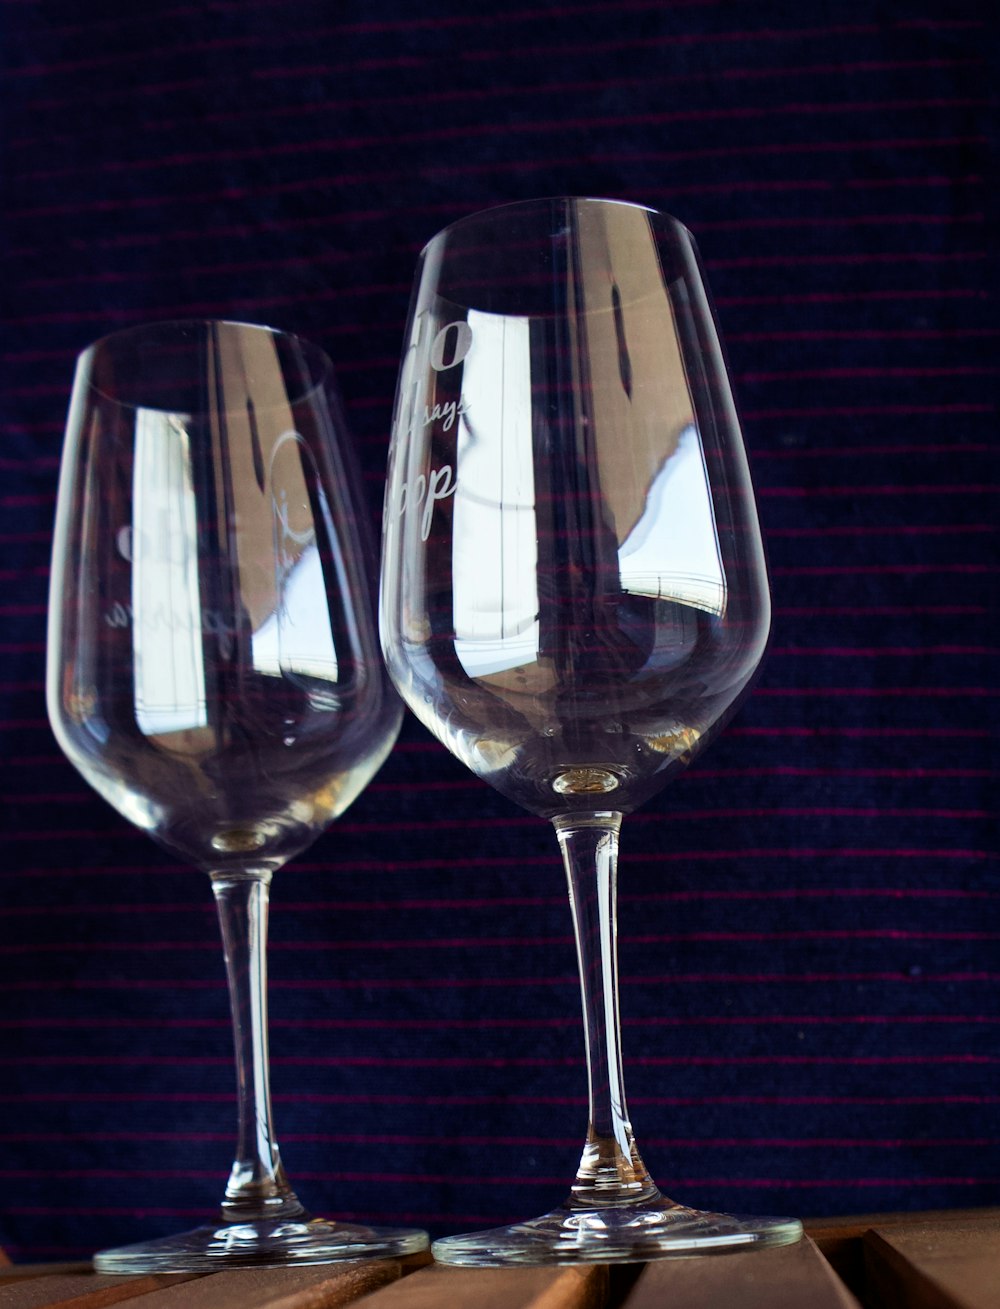 2 clear wine glasses on black surface